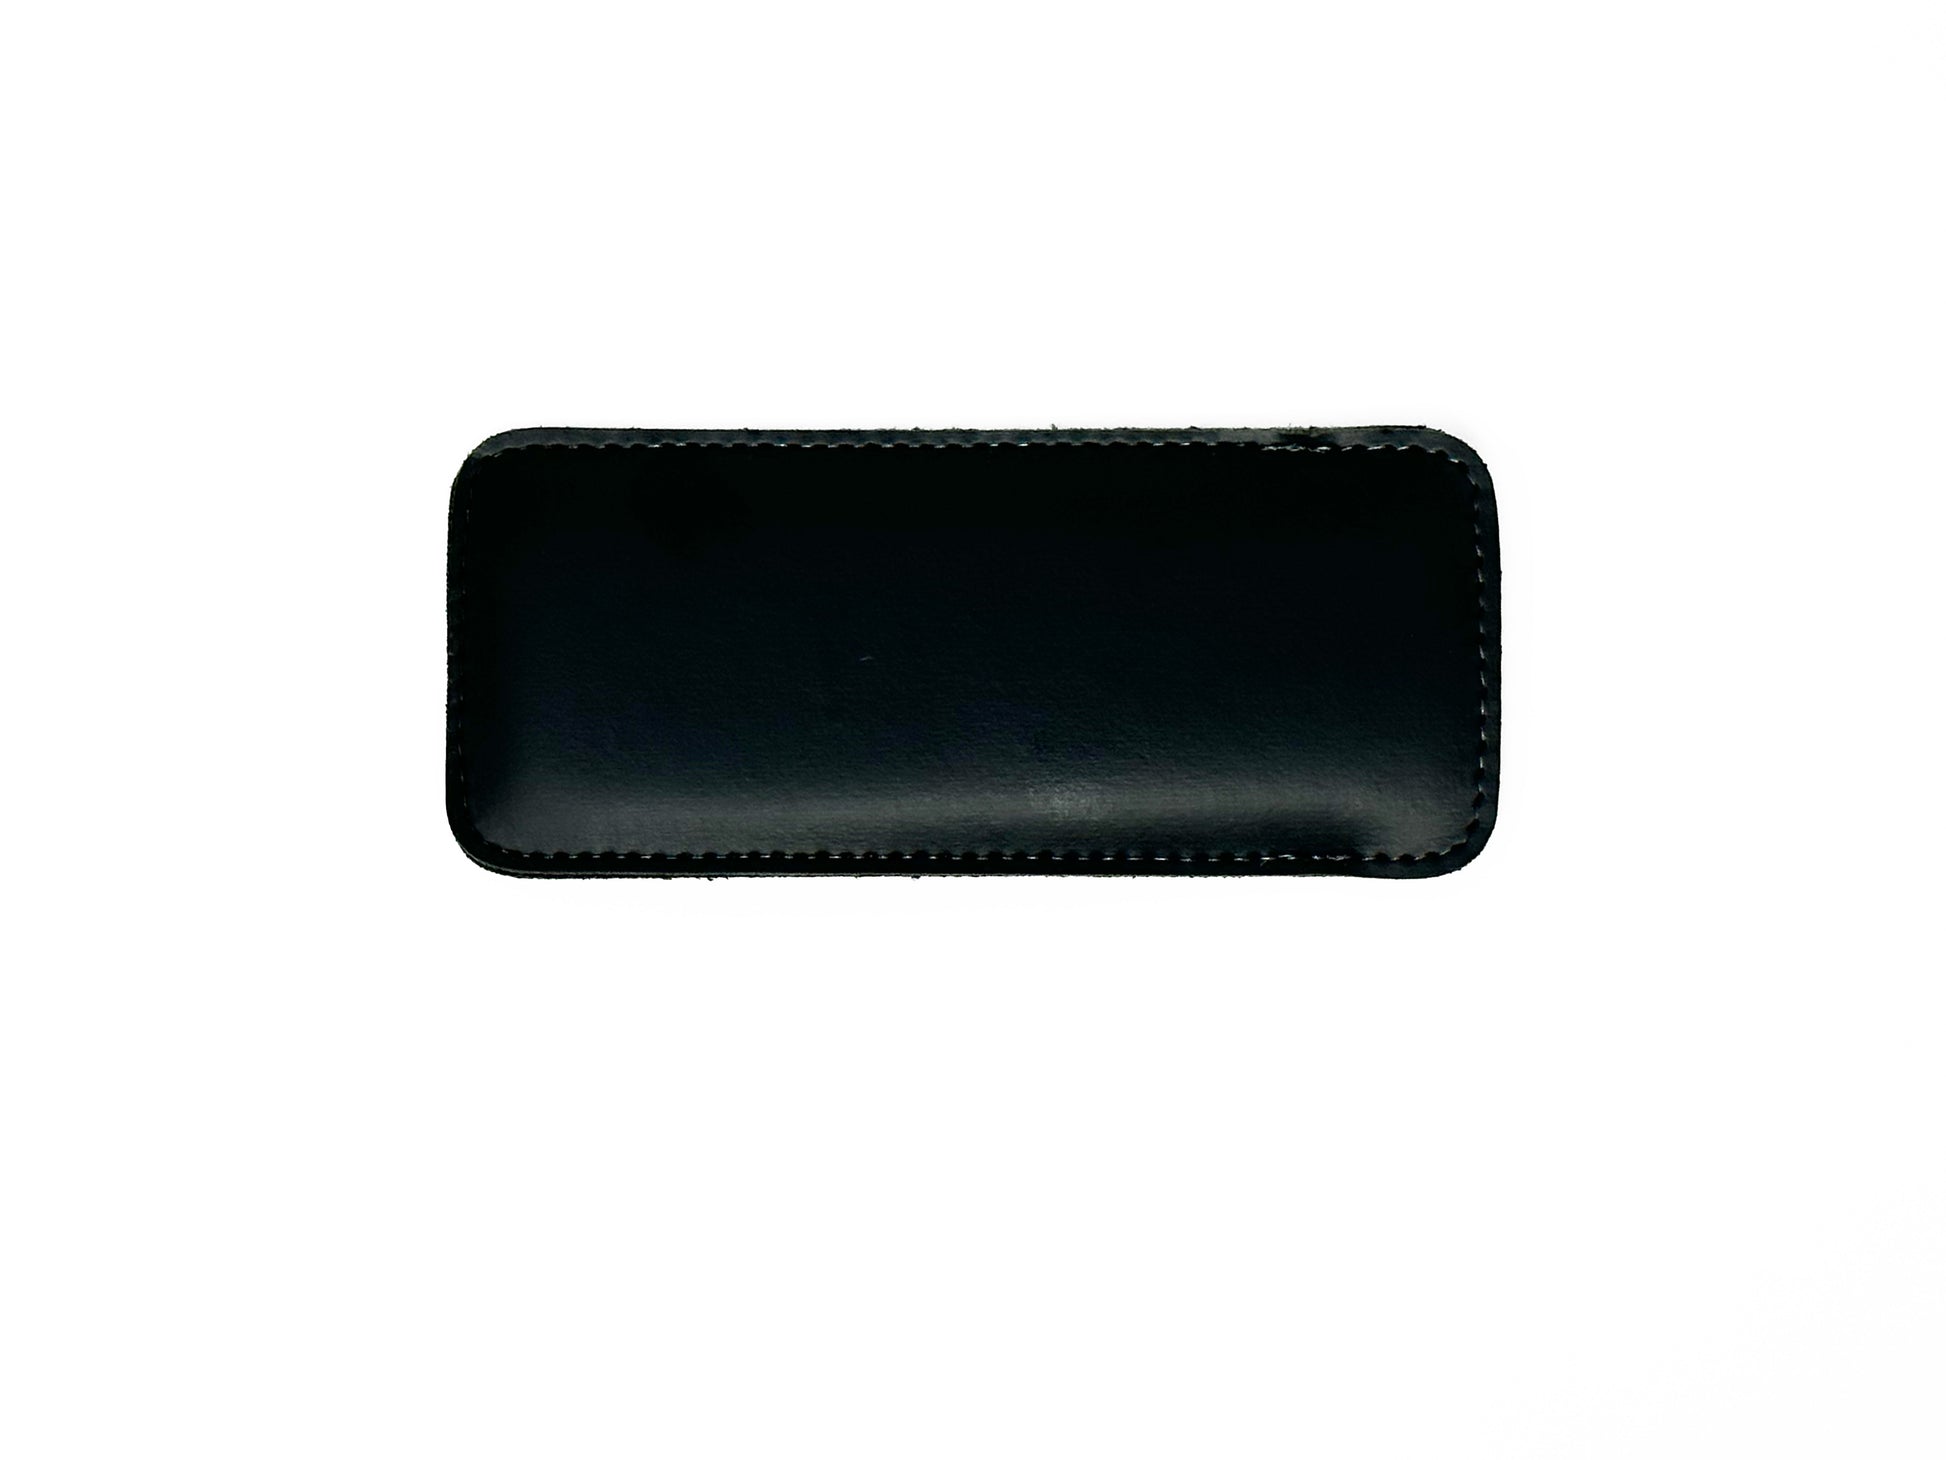 Thin, compact leather slip-in case in Black.